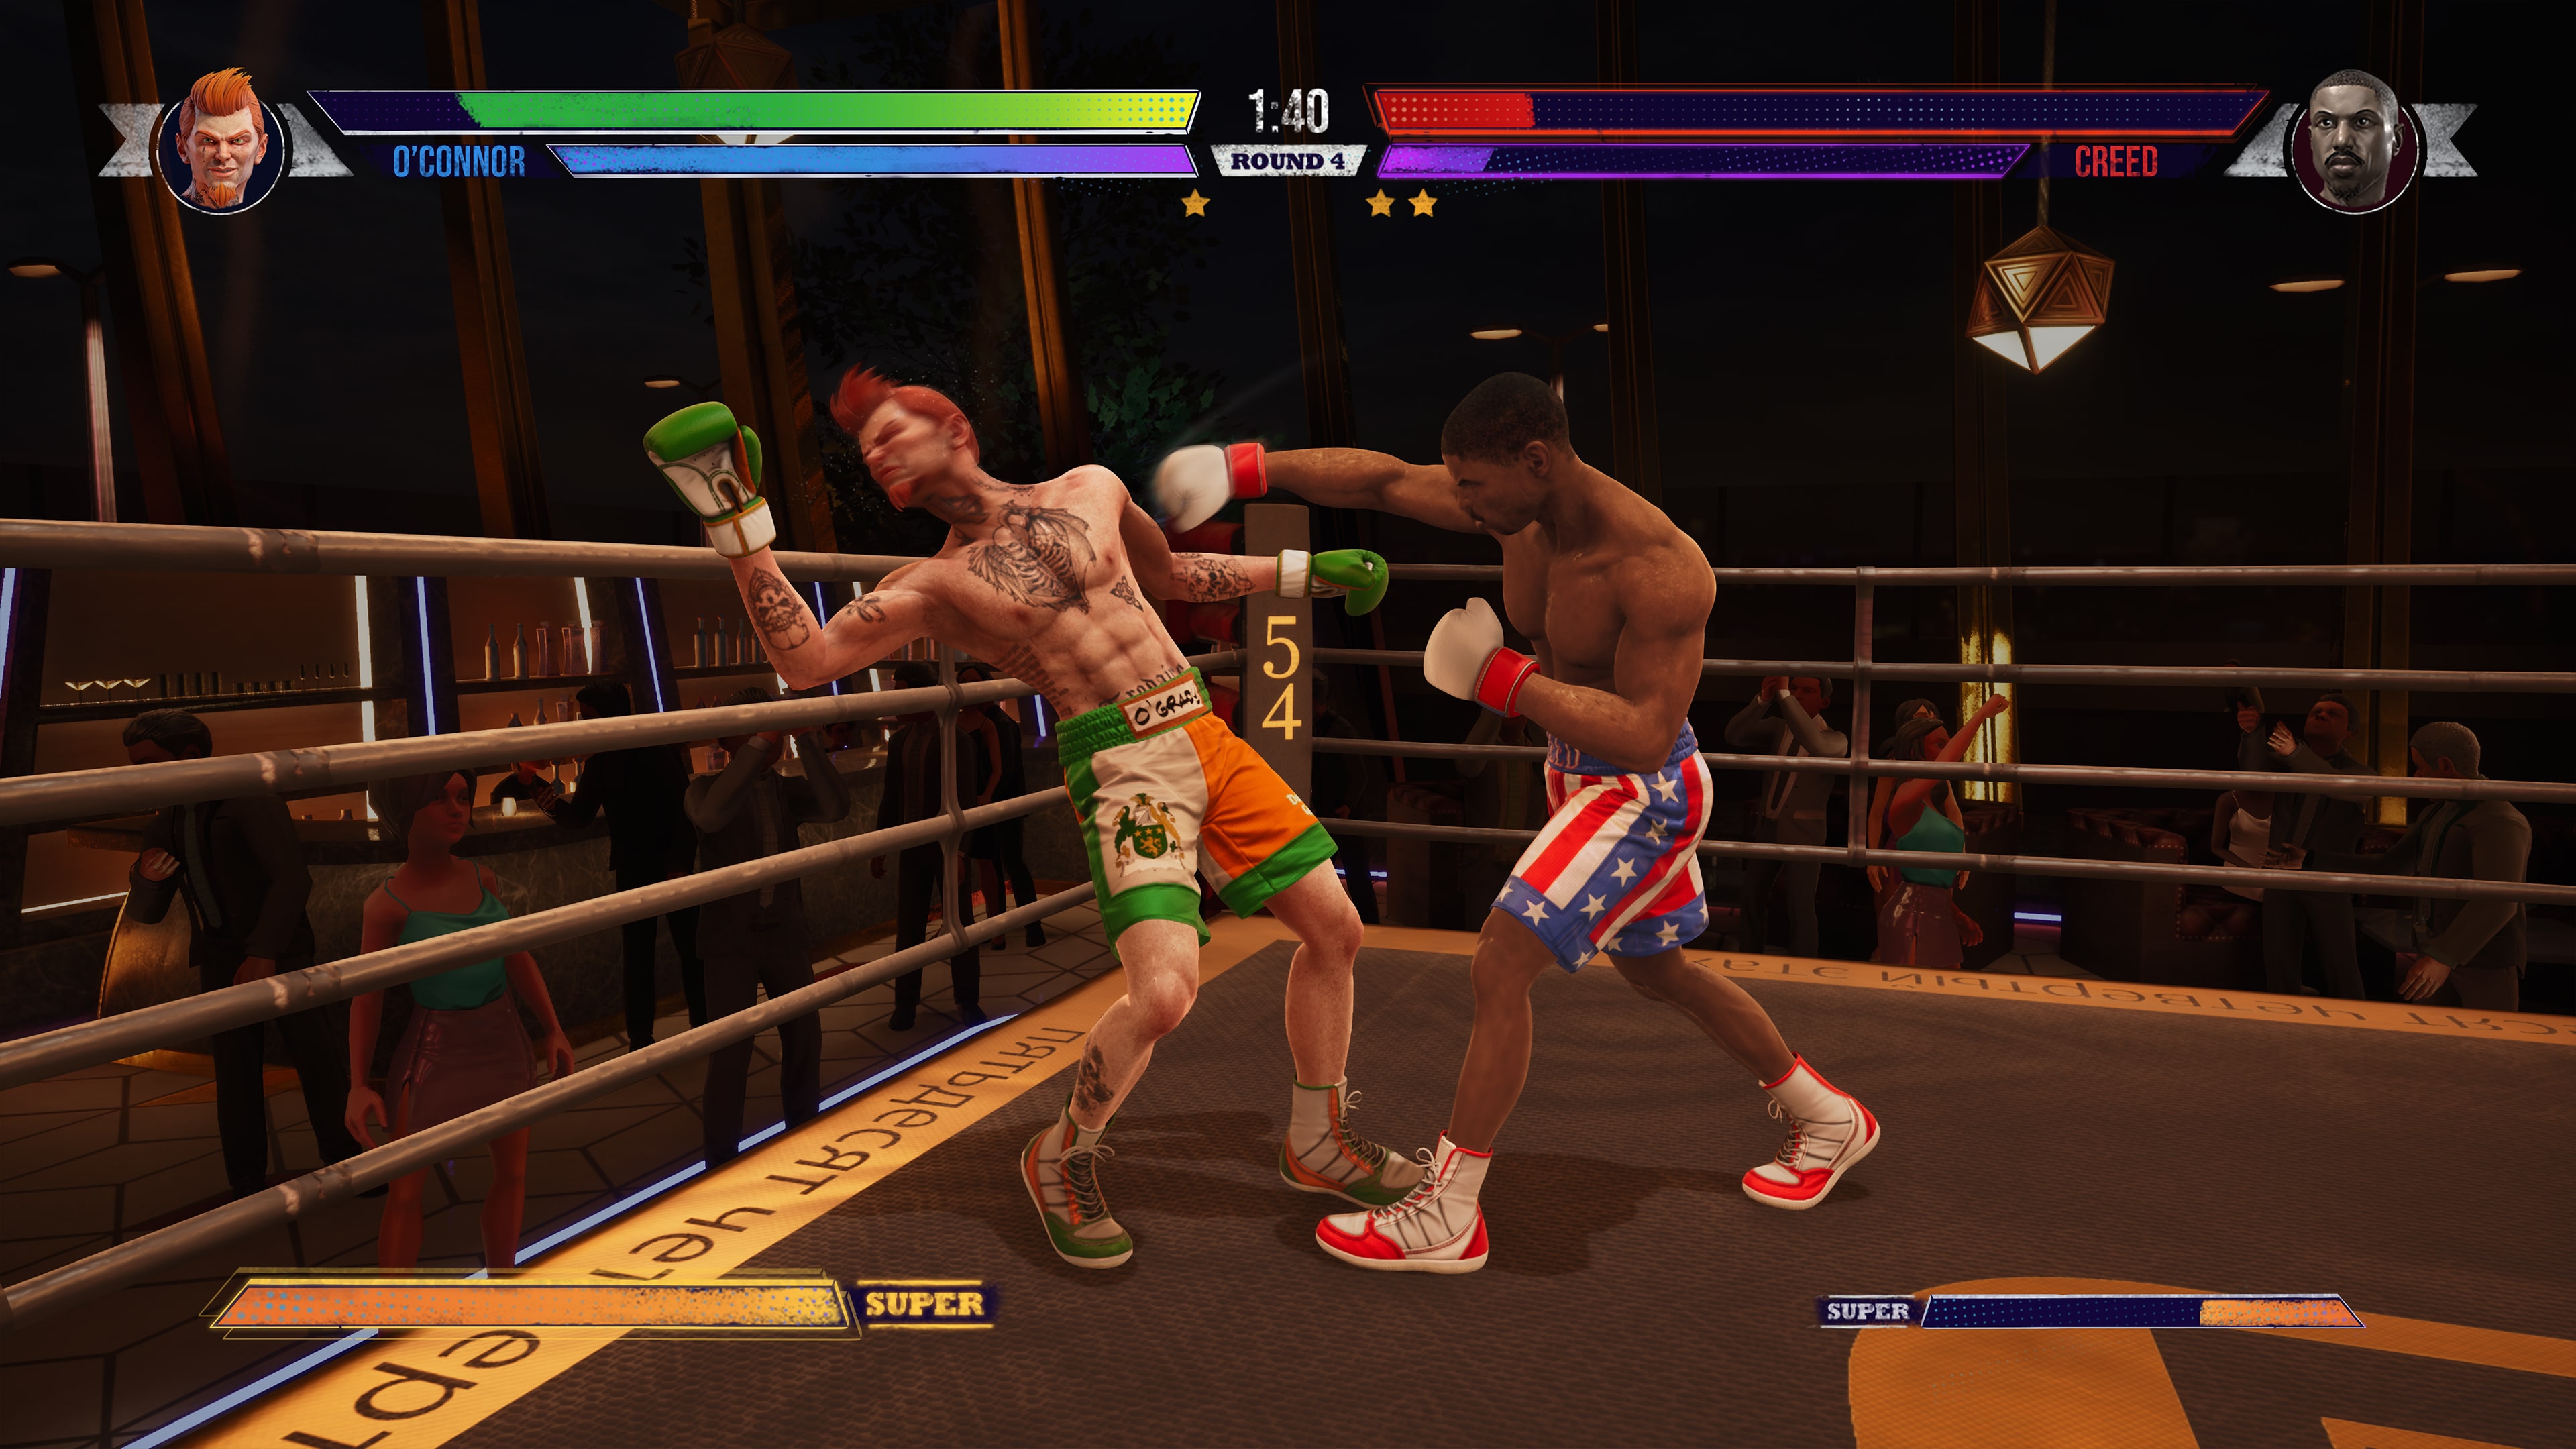 Игры бокс россия. Rumble Boxing Creed Champions. Big Rumble Boxing: Creed Champions ps4. Ps3 big Rumble Boxing. Big Rumble Creed Champions Boxing Day one Edition.